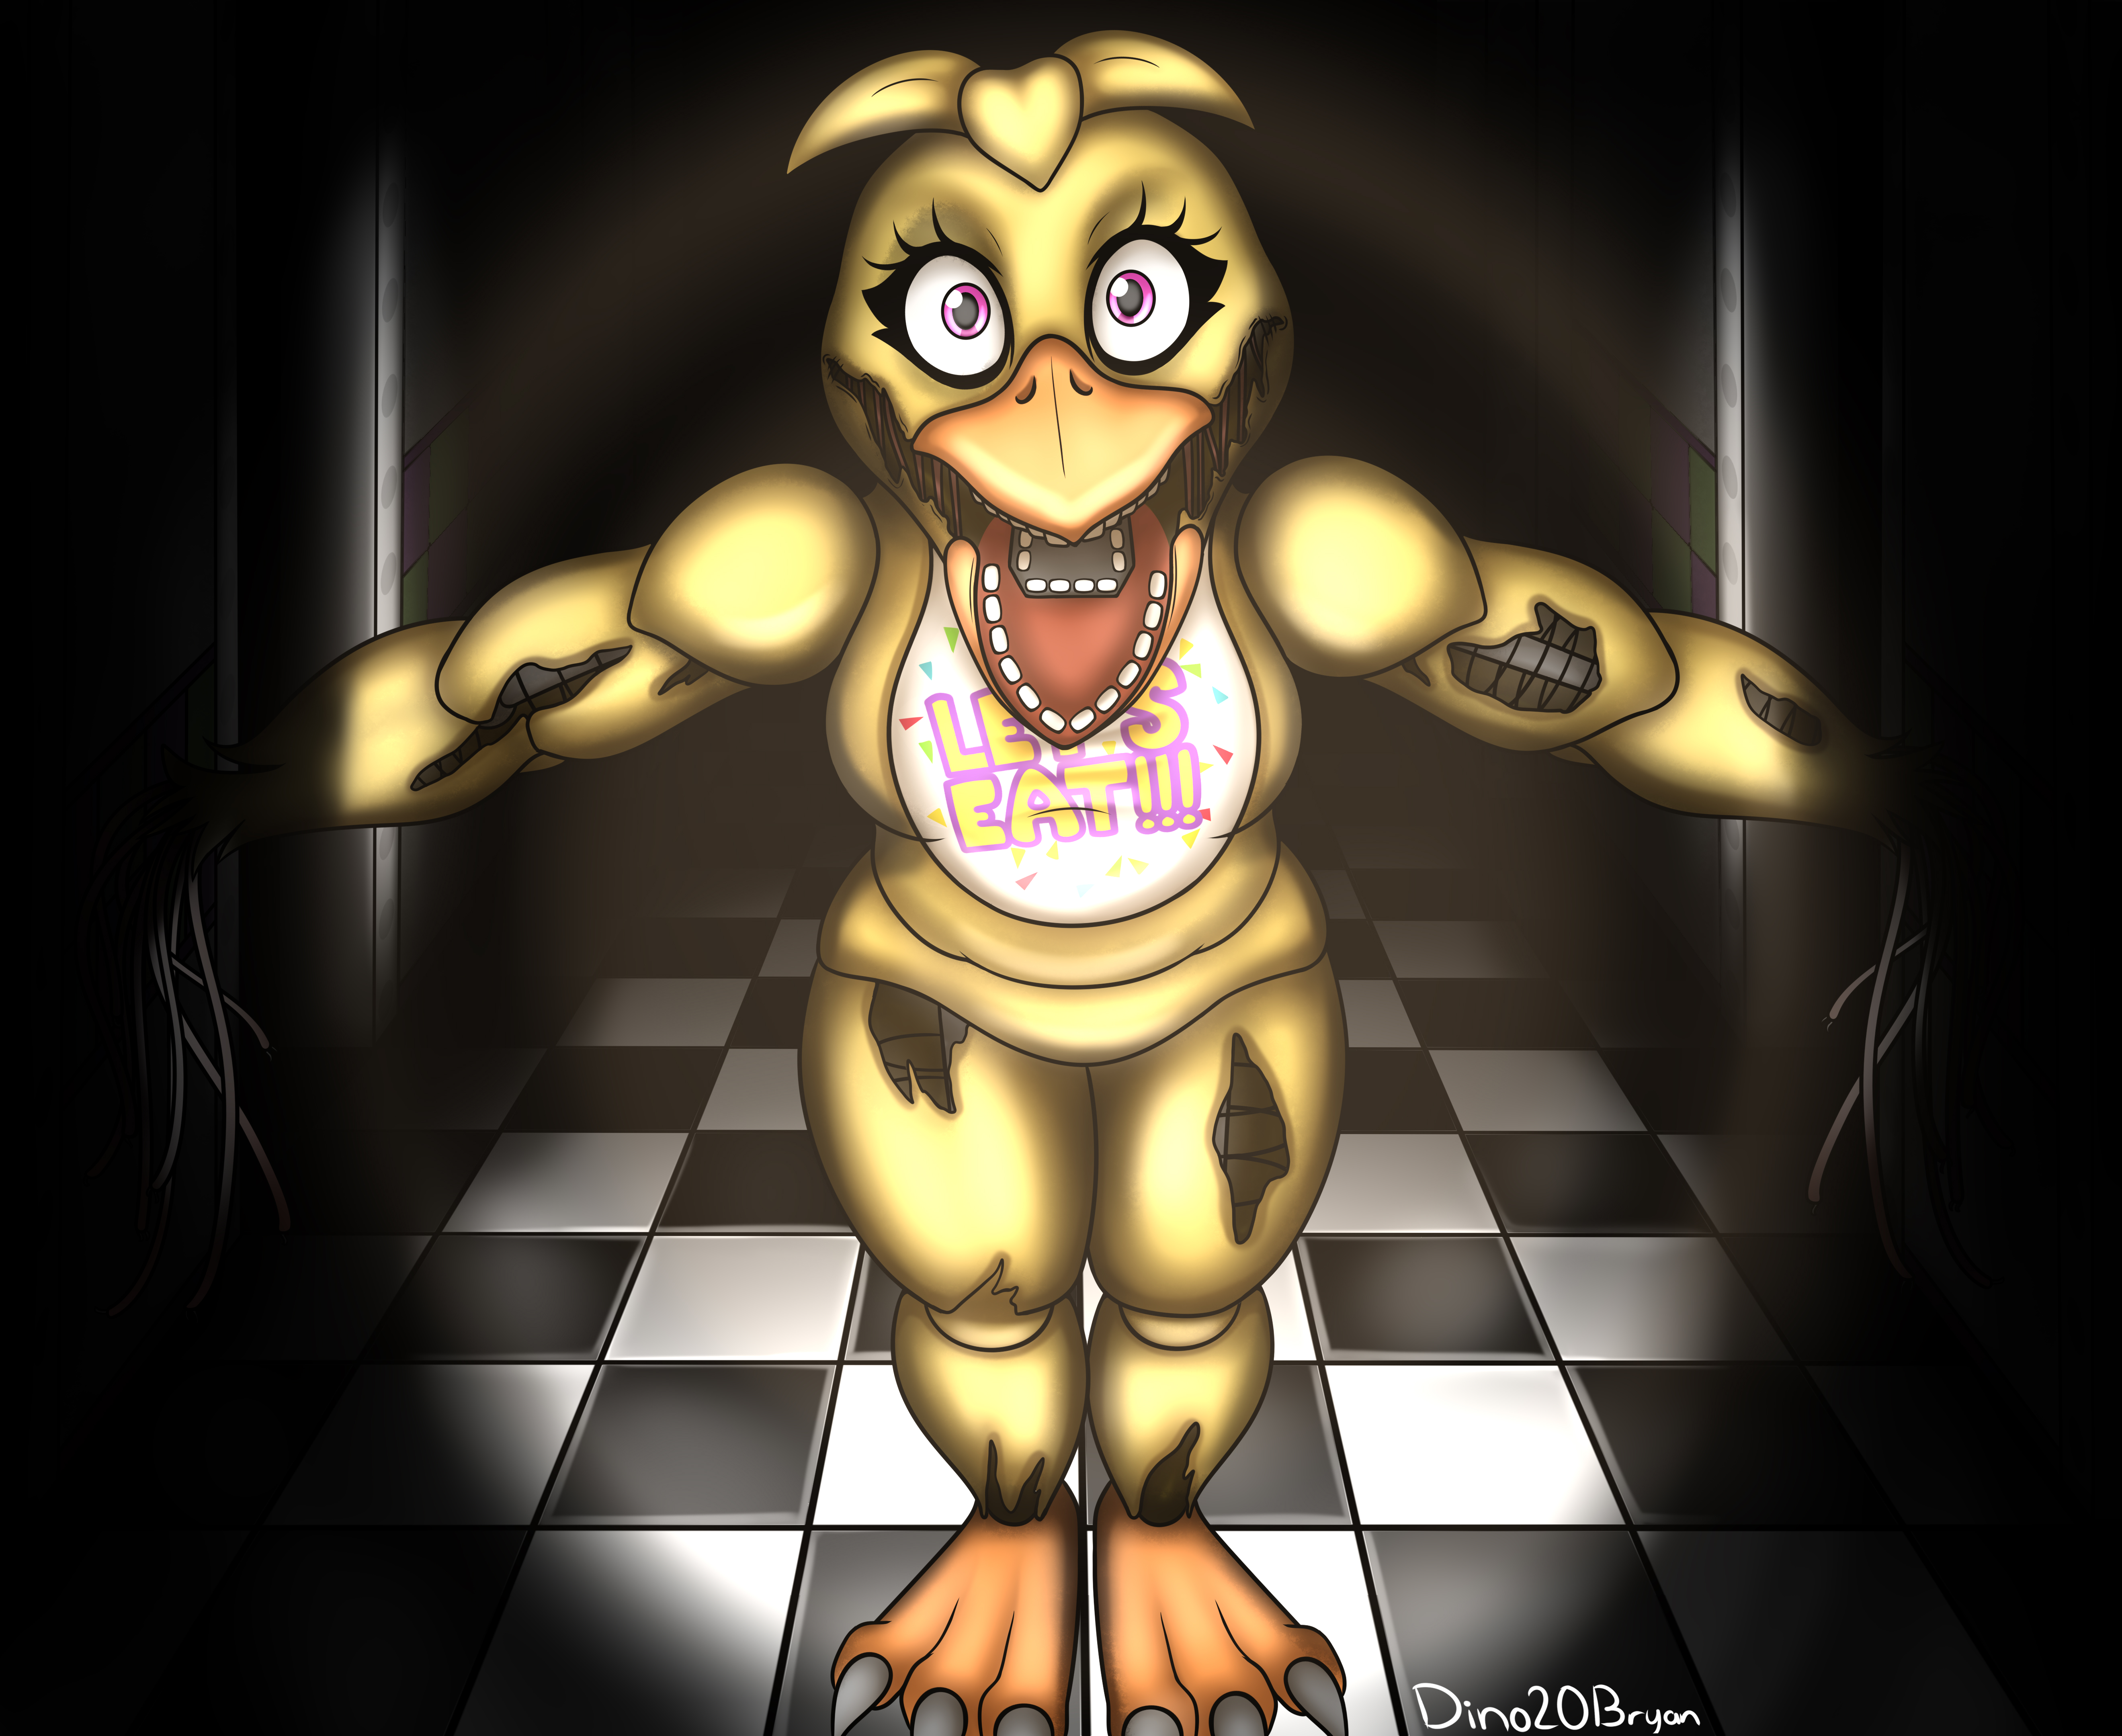 Friday night funkin withered chica. #fivenightsatfreddys #fnaf2 #fnaf